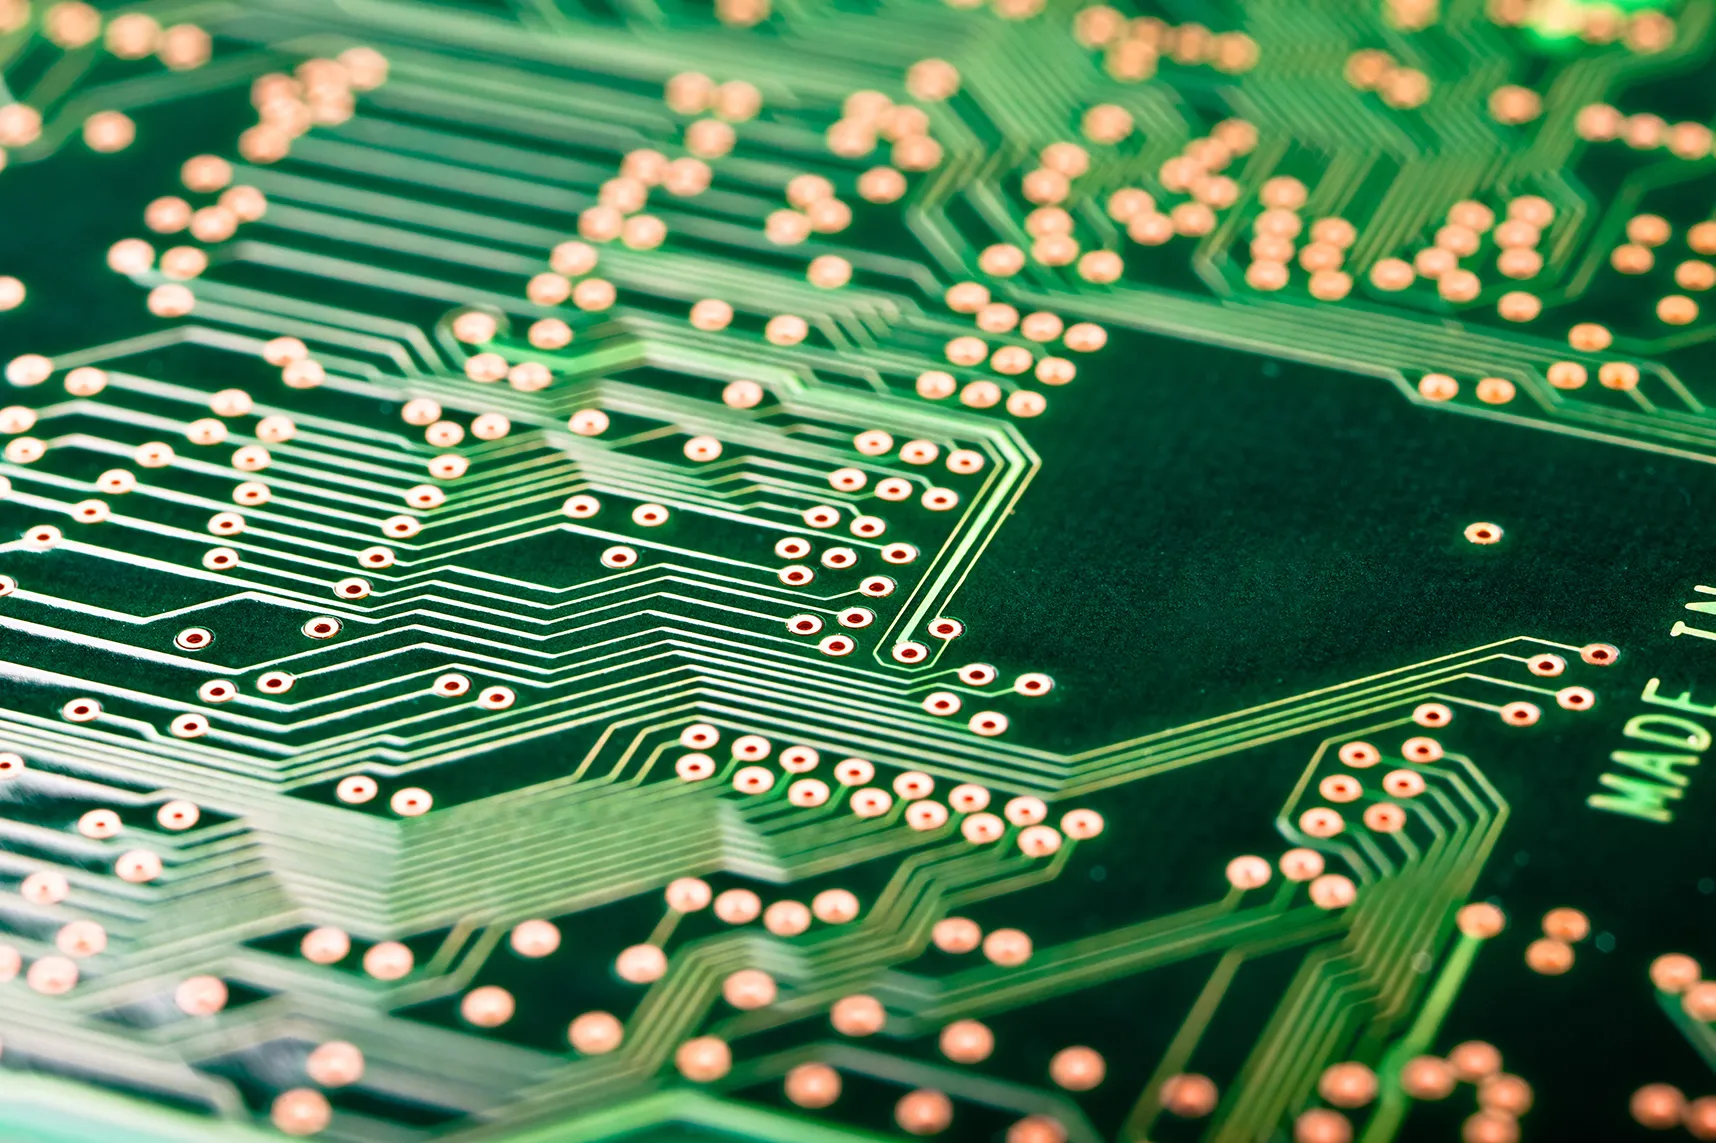 Future trends of the circuit board